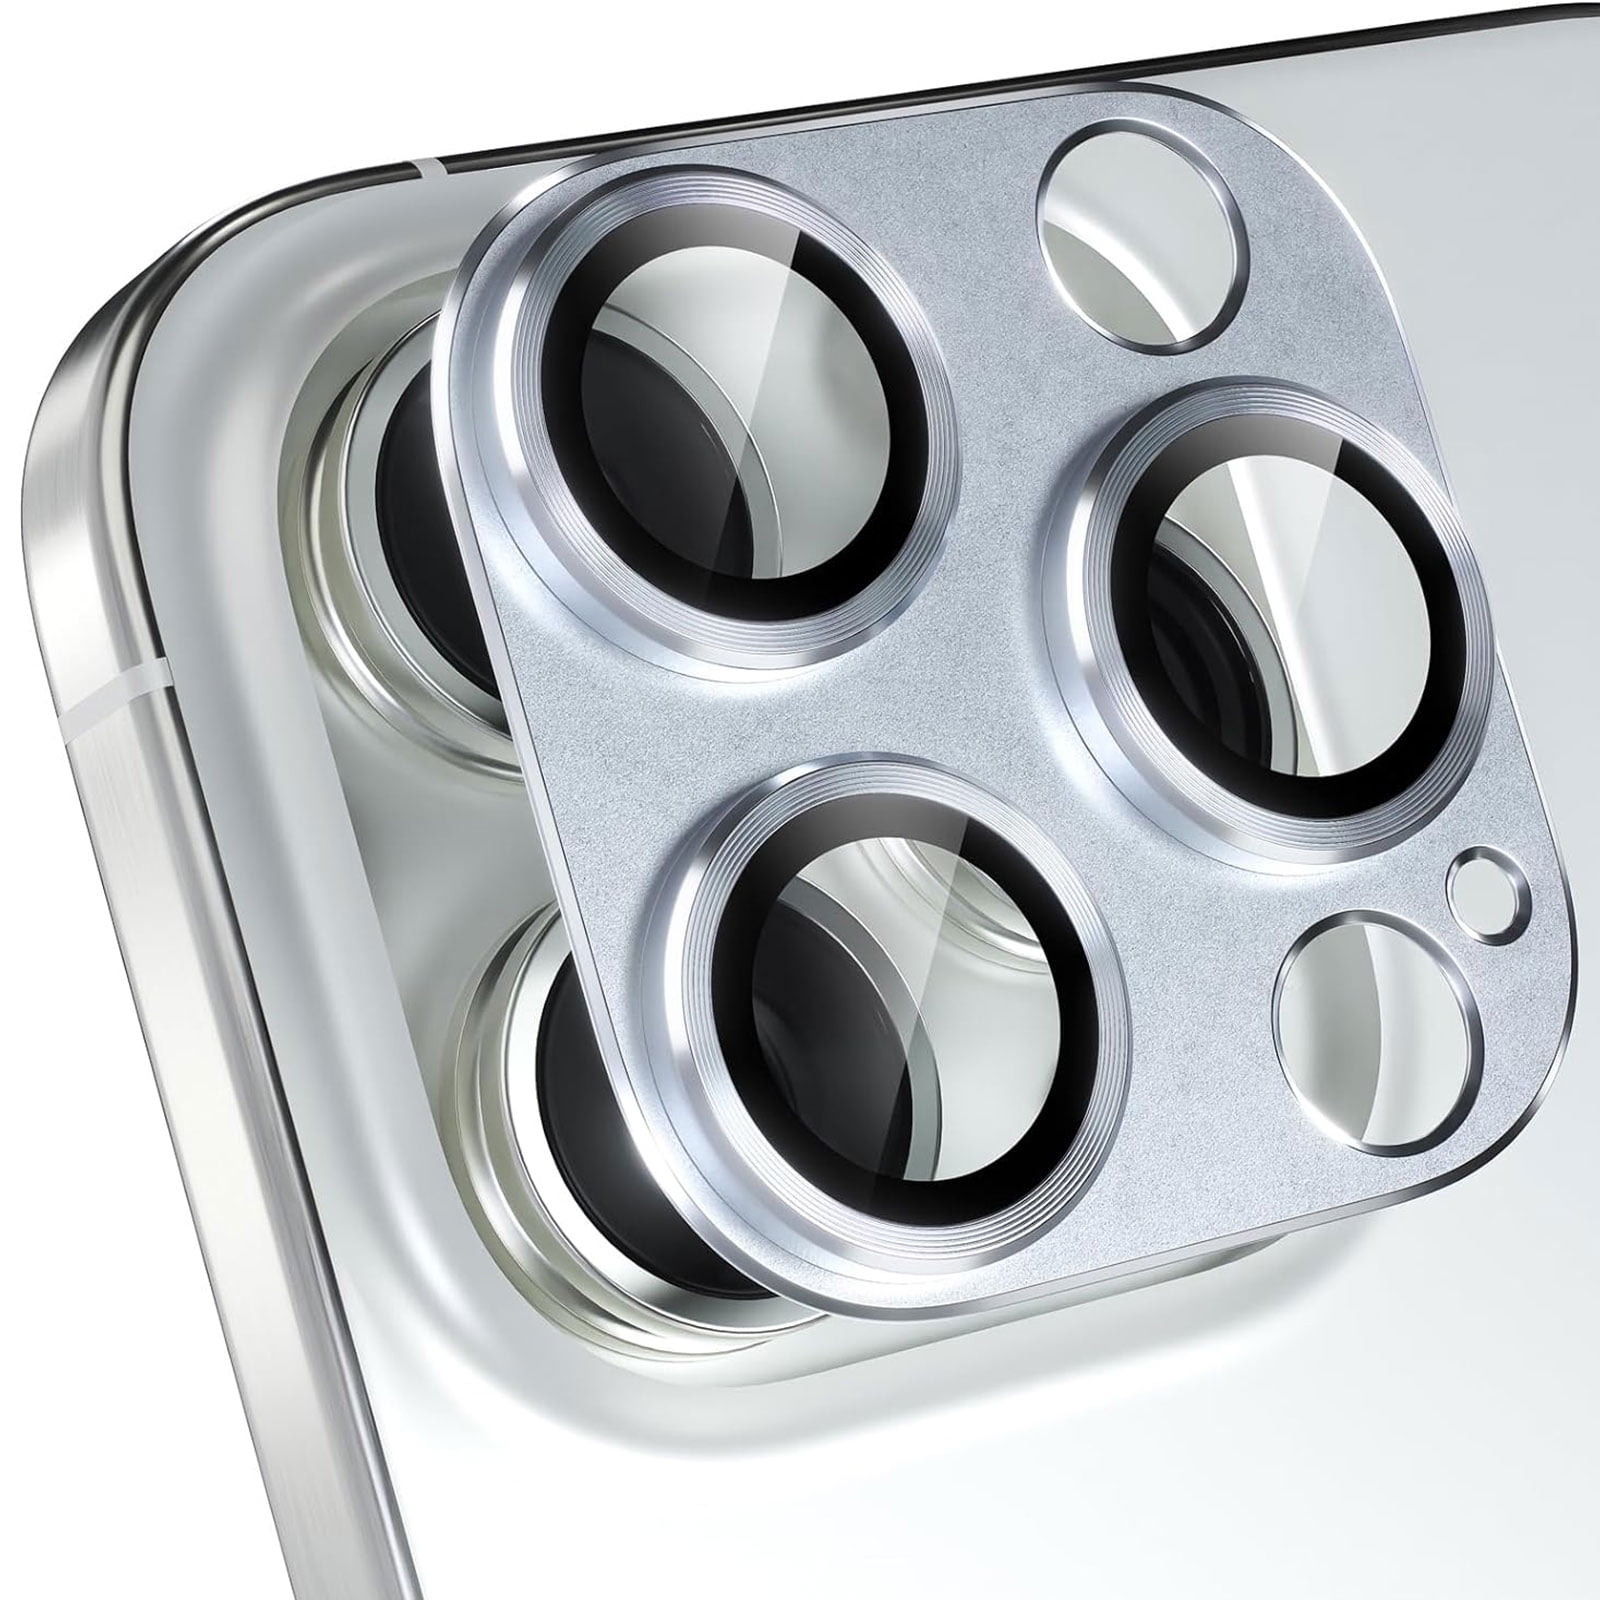  RhinoShield Camera Lens Protector Compatible with [iPhone 15  Pro/15 Pro Max] Impact Protection-High Clarity and Scratch/Fingerprint  Resistant 9H Tempered Glass with Aluminum Trim-Silver : Cell Phones &  Accessories